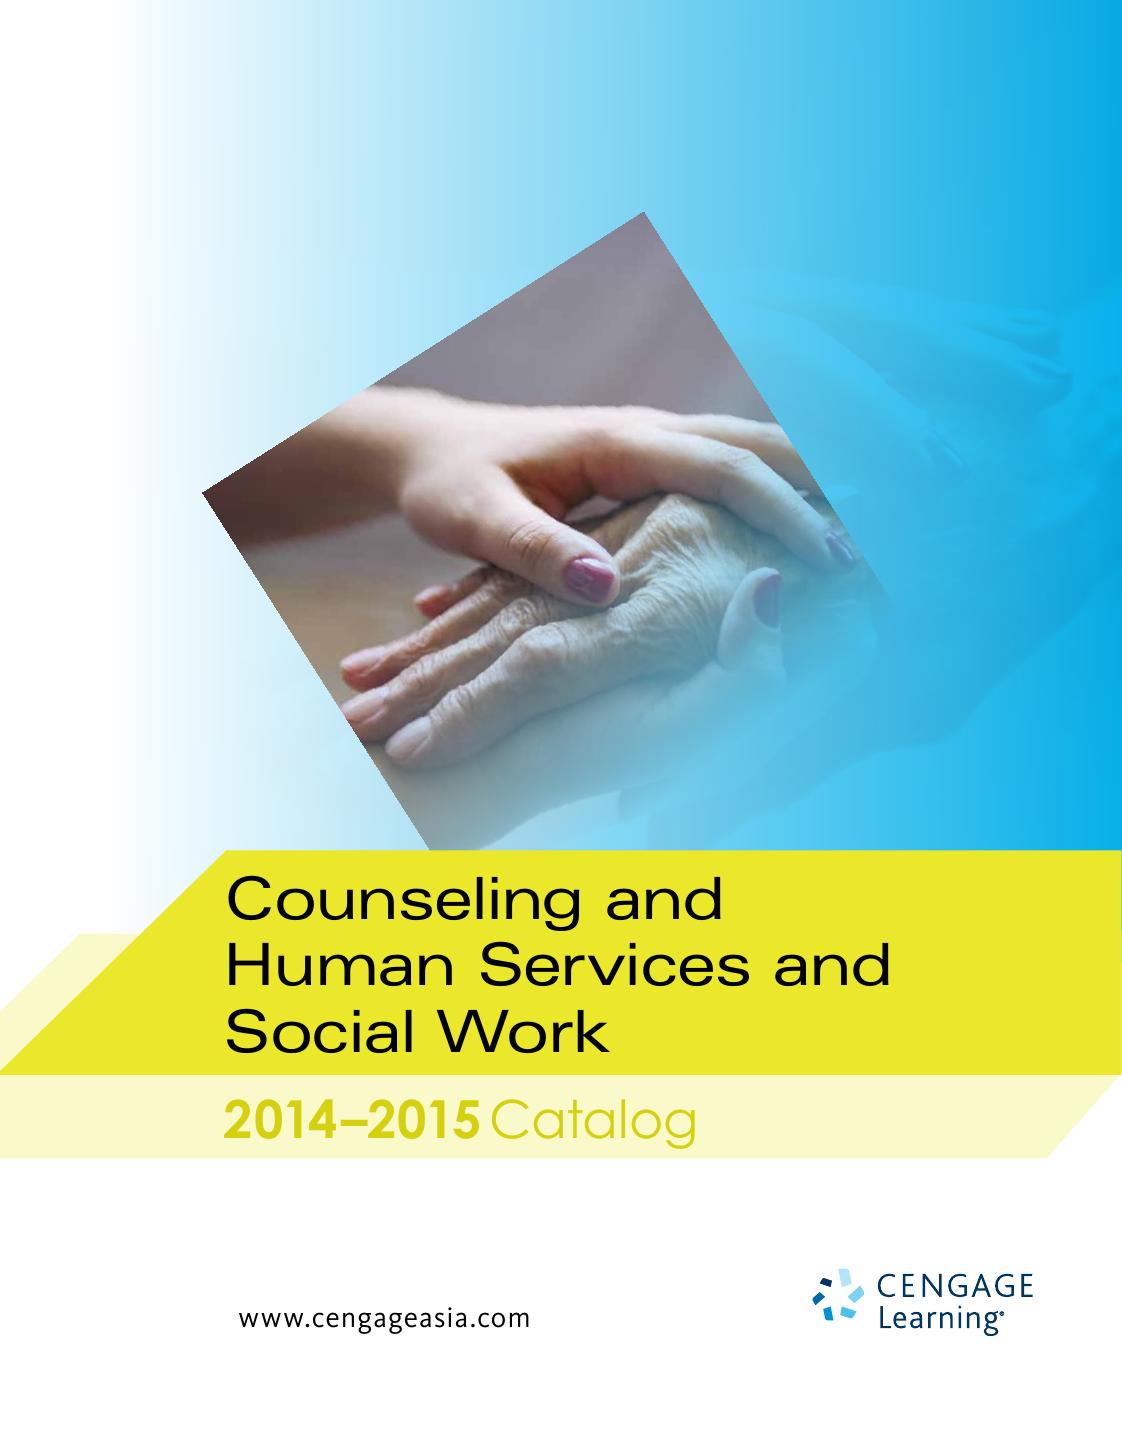 Acad Asia Counseling 2014-2015 Catalog